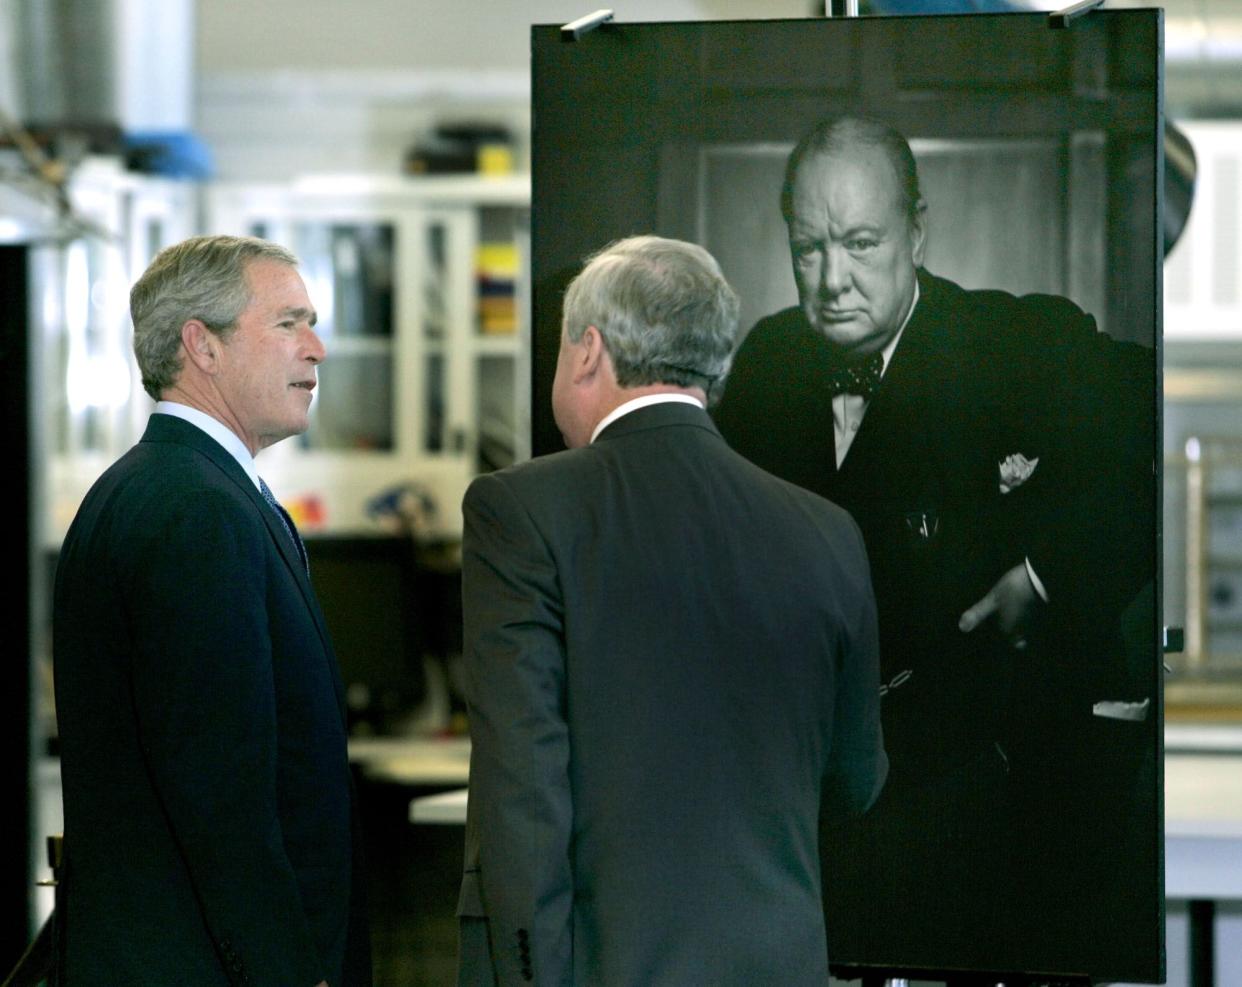 U.S. President George W. Bush, left, stops by a portrait of former British Prime Minister Winston Churchill by Canadian photographer Yousuf Karsh during a tour of  the National Archives Preservation Center in Ottawa, Canada, Tuesday, Nov. 30, 2004.